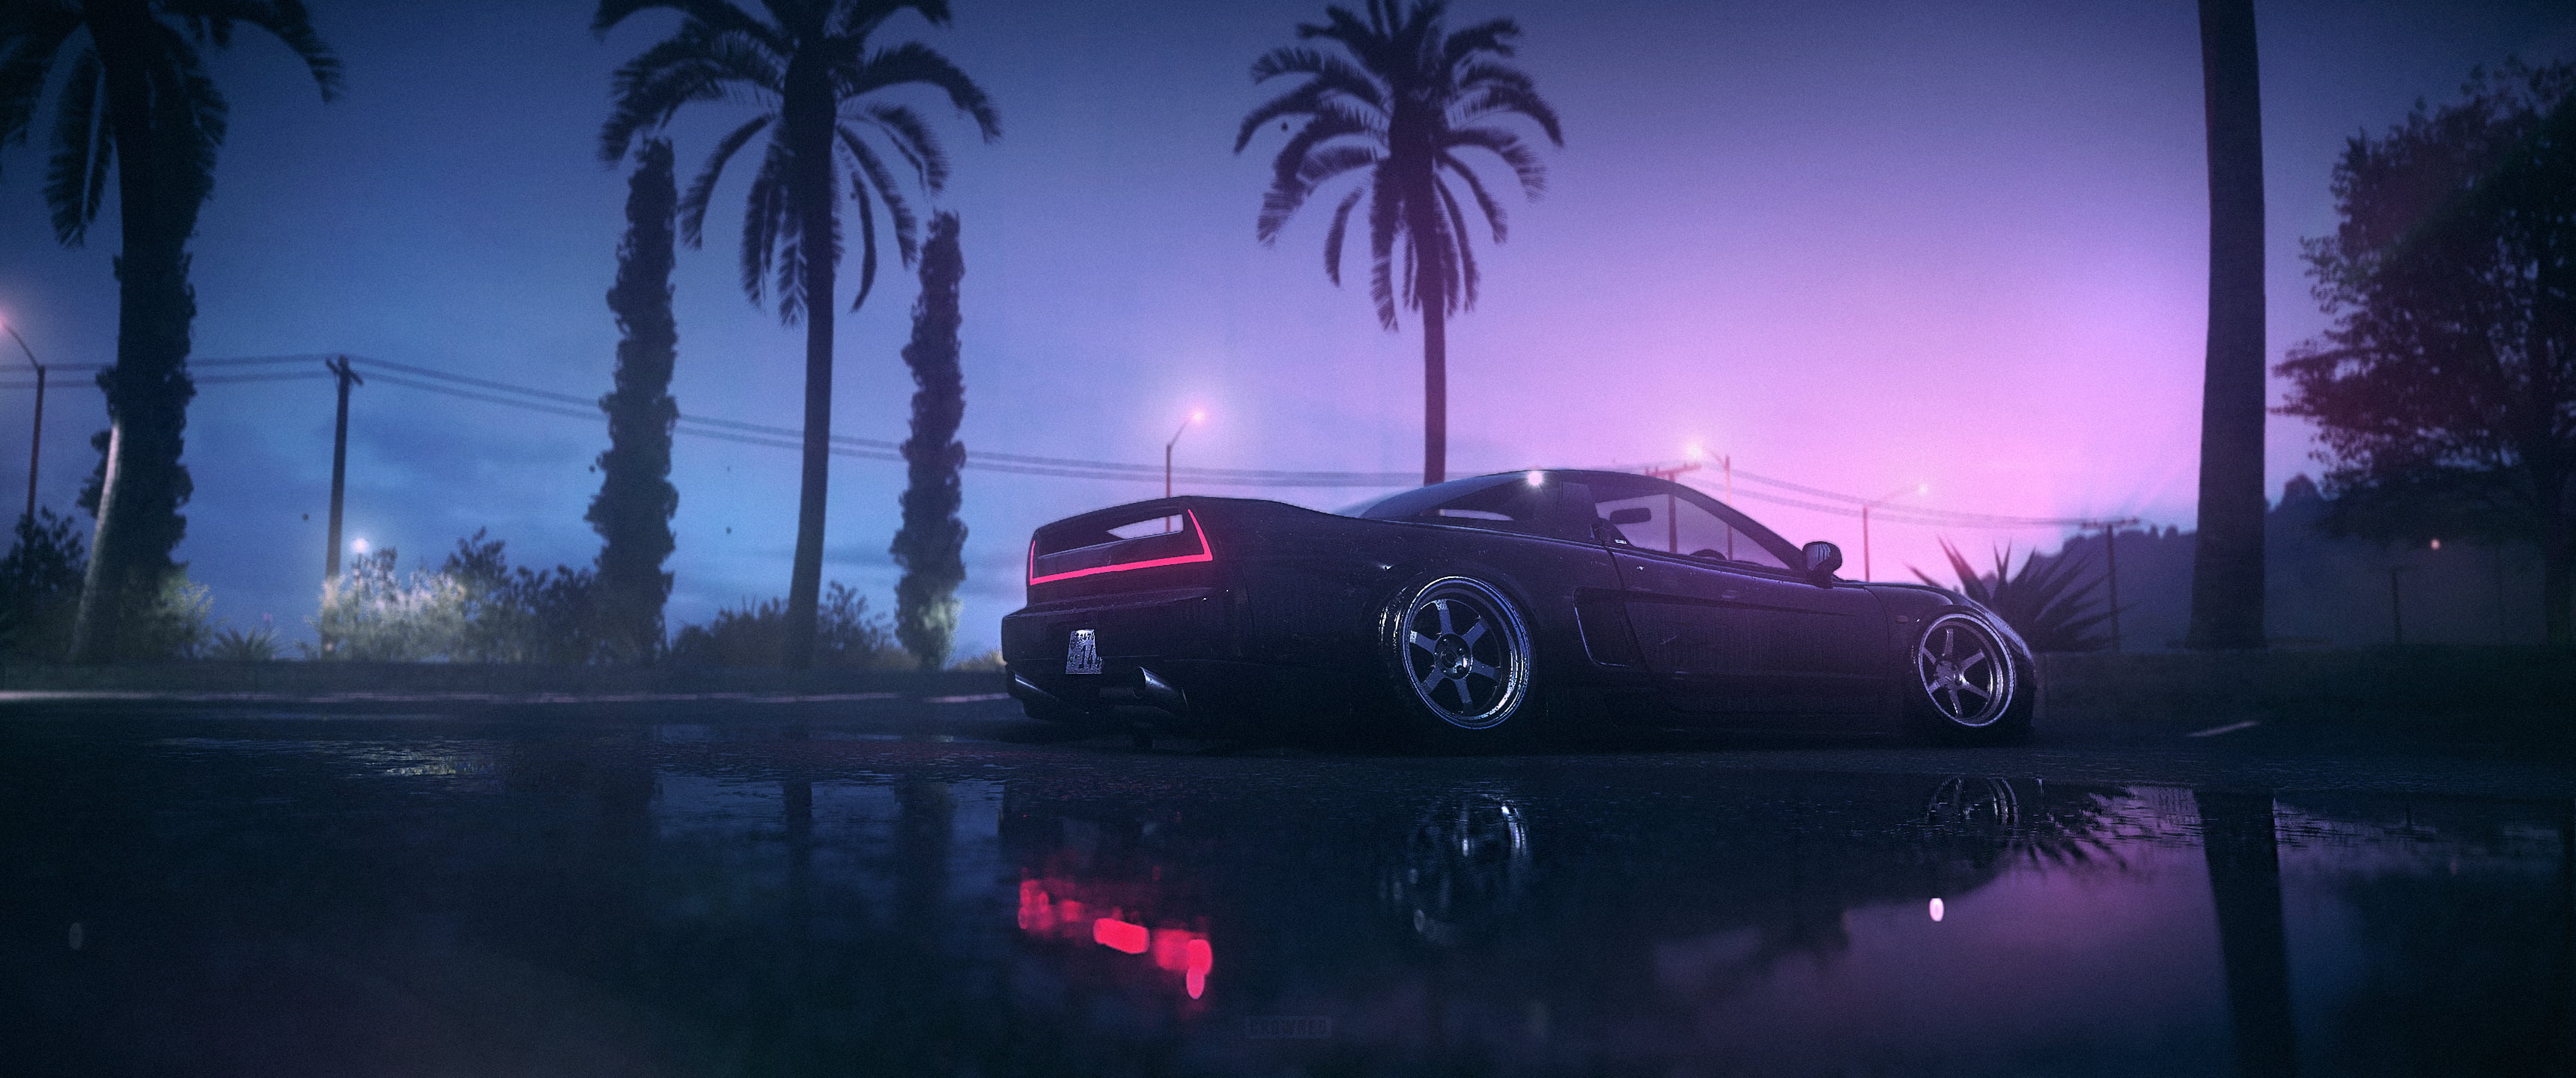 NFS 2015, CROWNED, Need for Speed, Need For Speed 2015, car